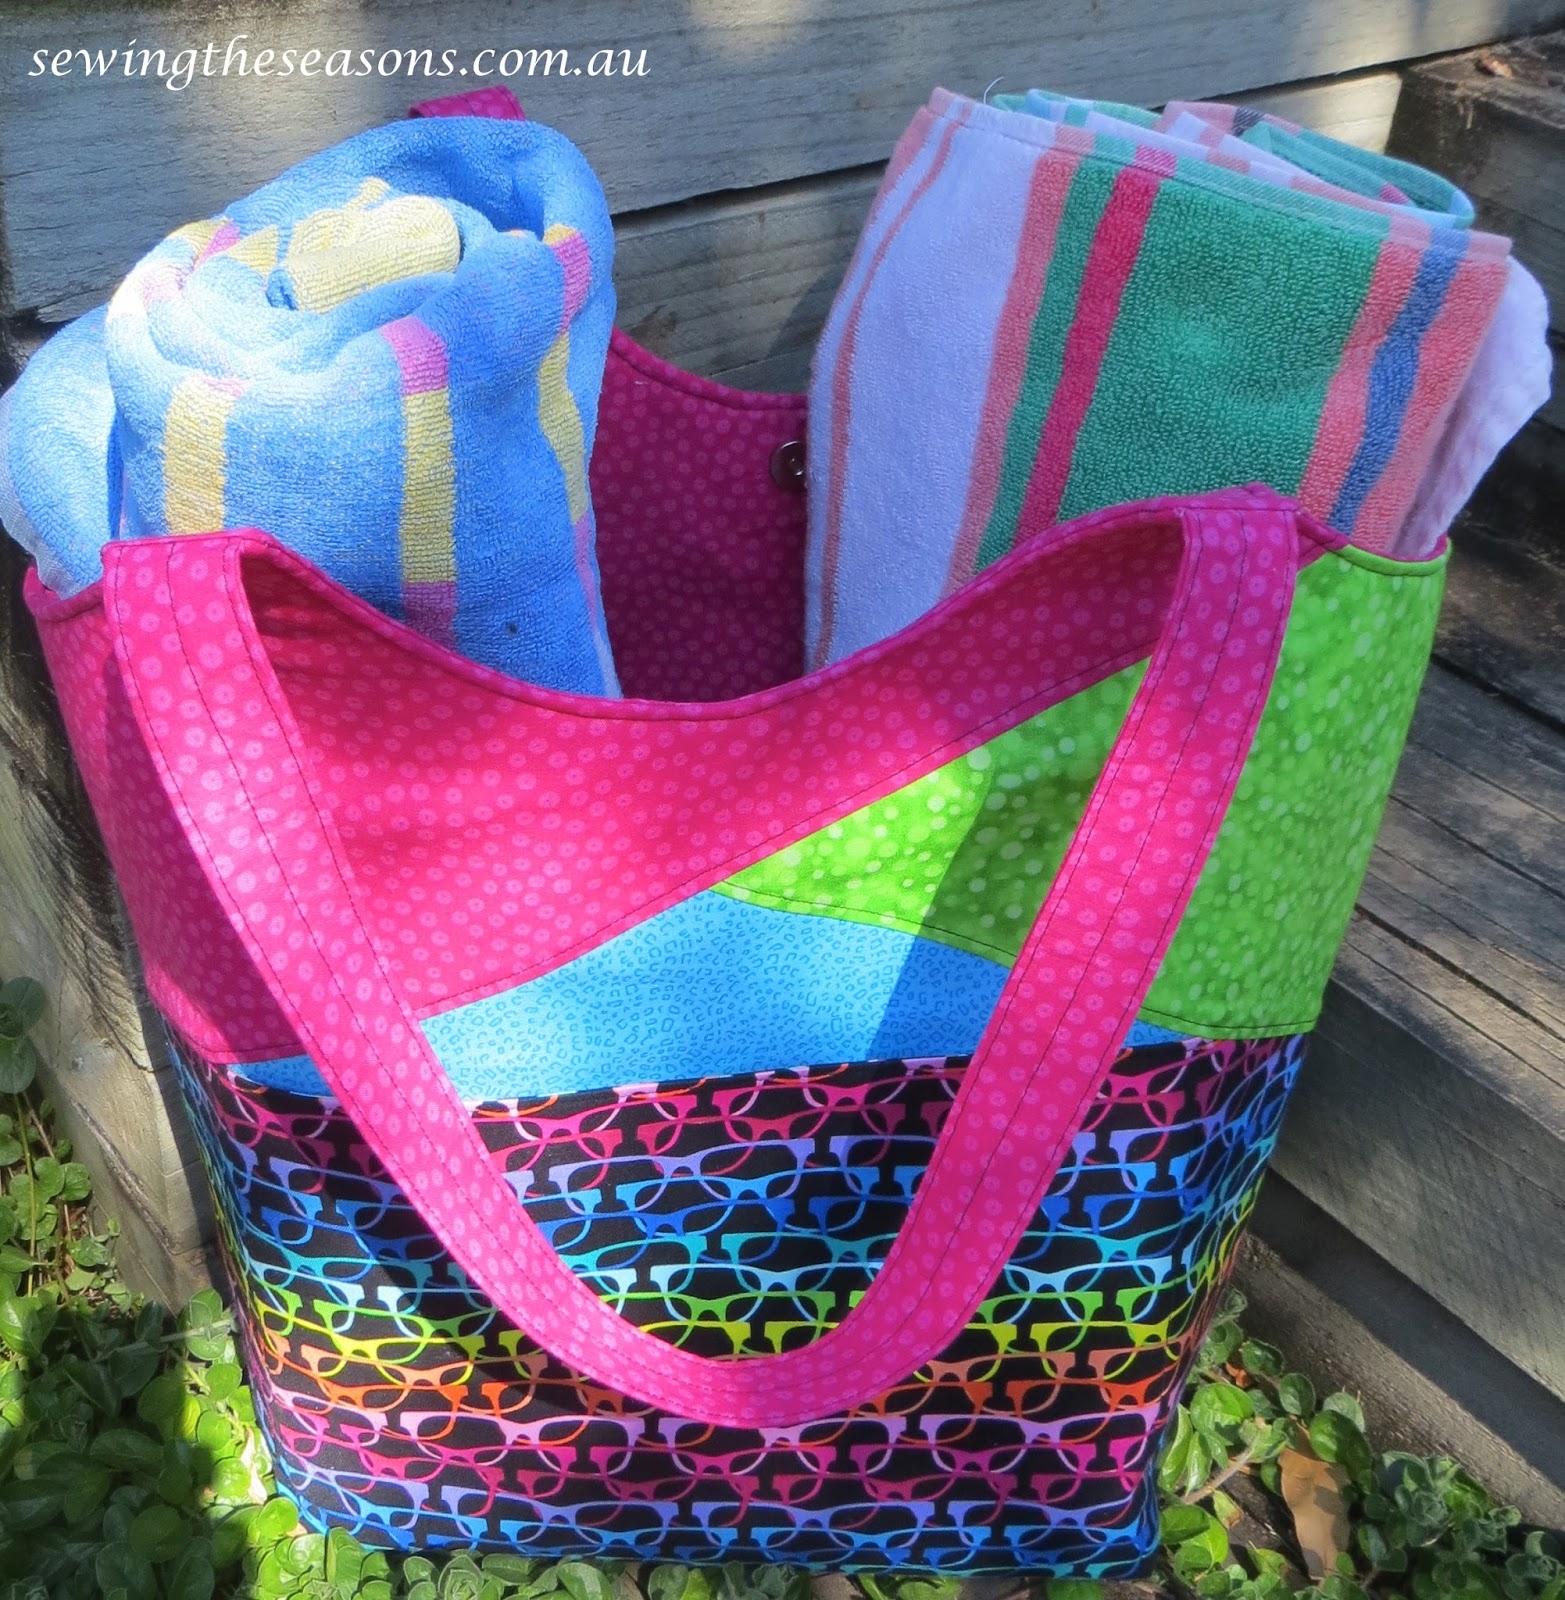 Sewing The Seasons: Pattern Test - Stand Up and Tote Notice